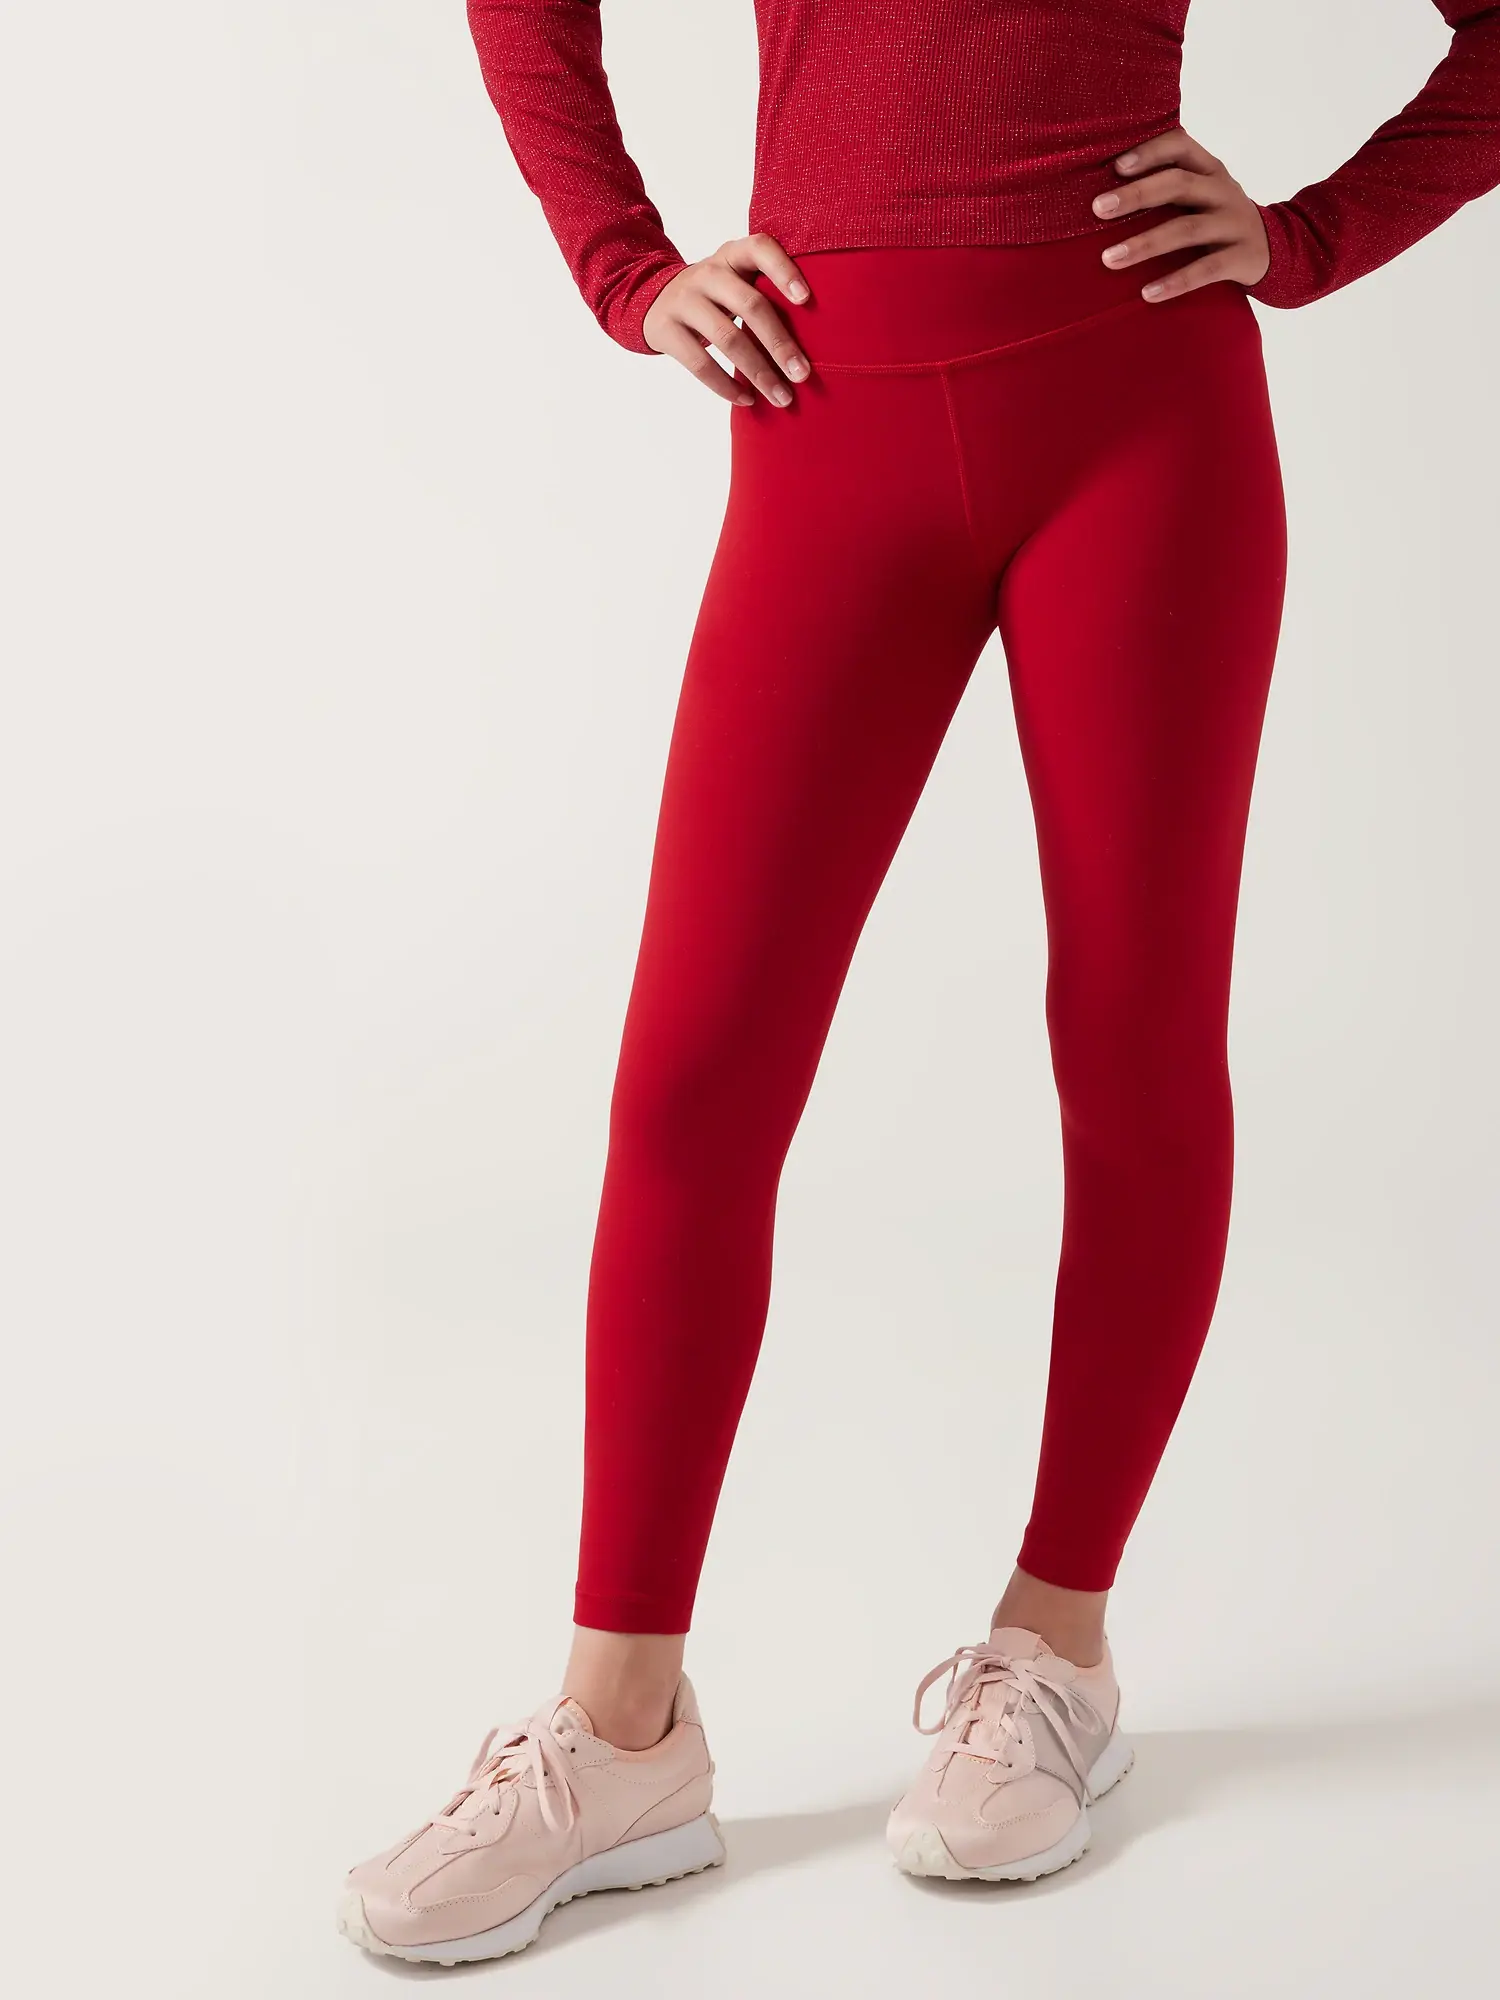 Athleta Girl High Rise Powervita Chit Chat Tight red - 528126212